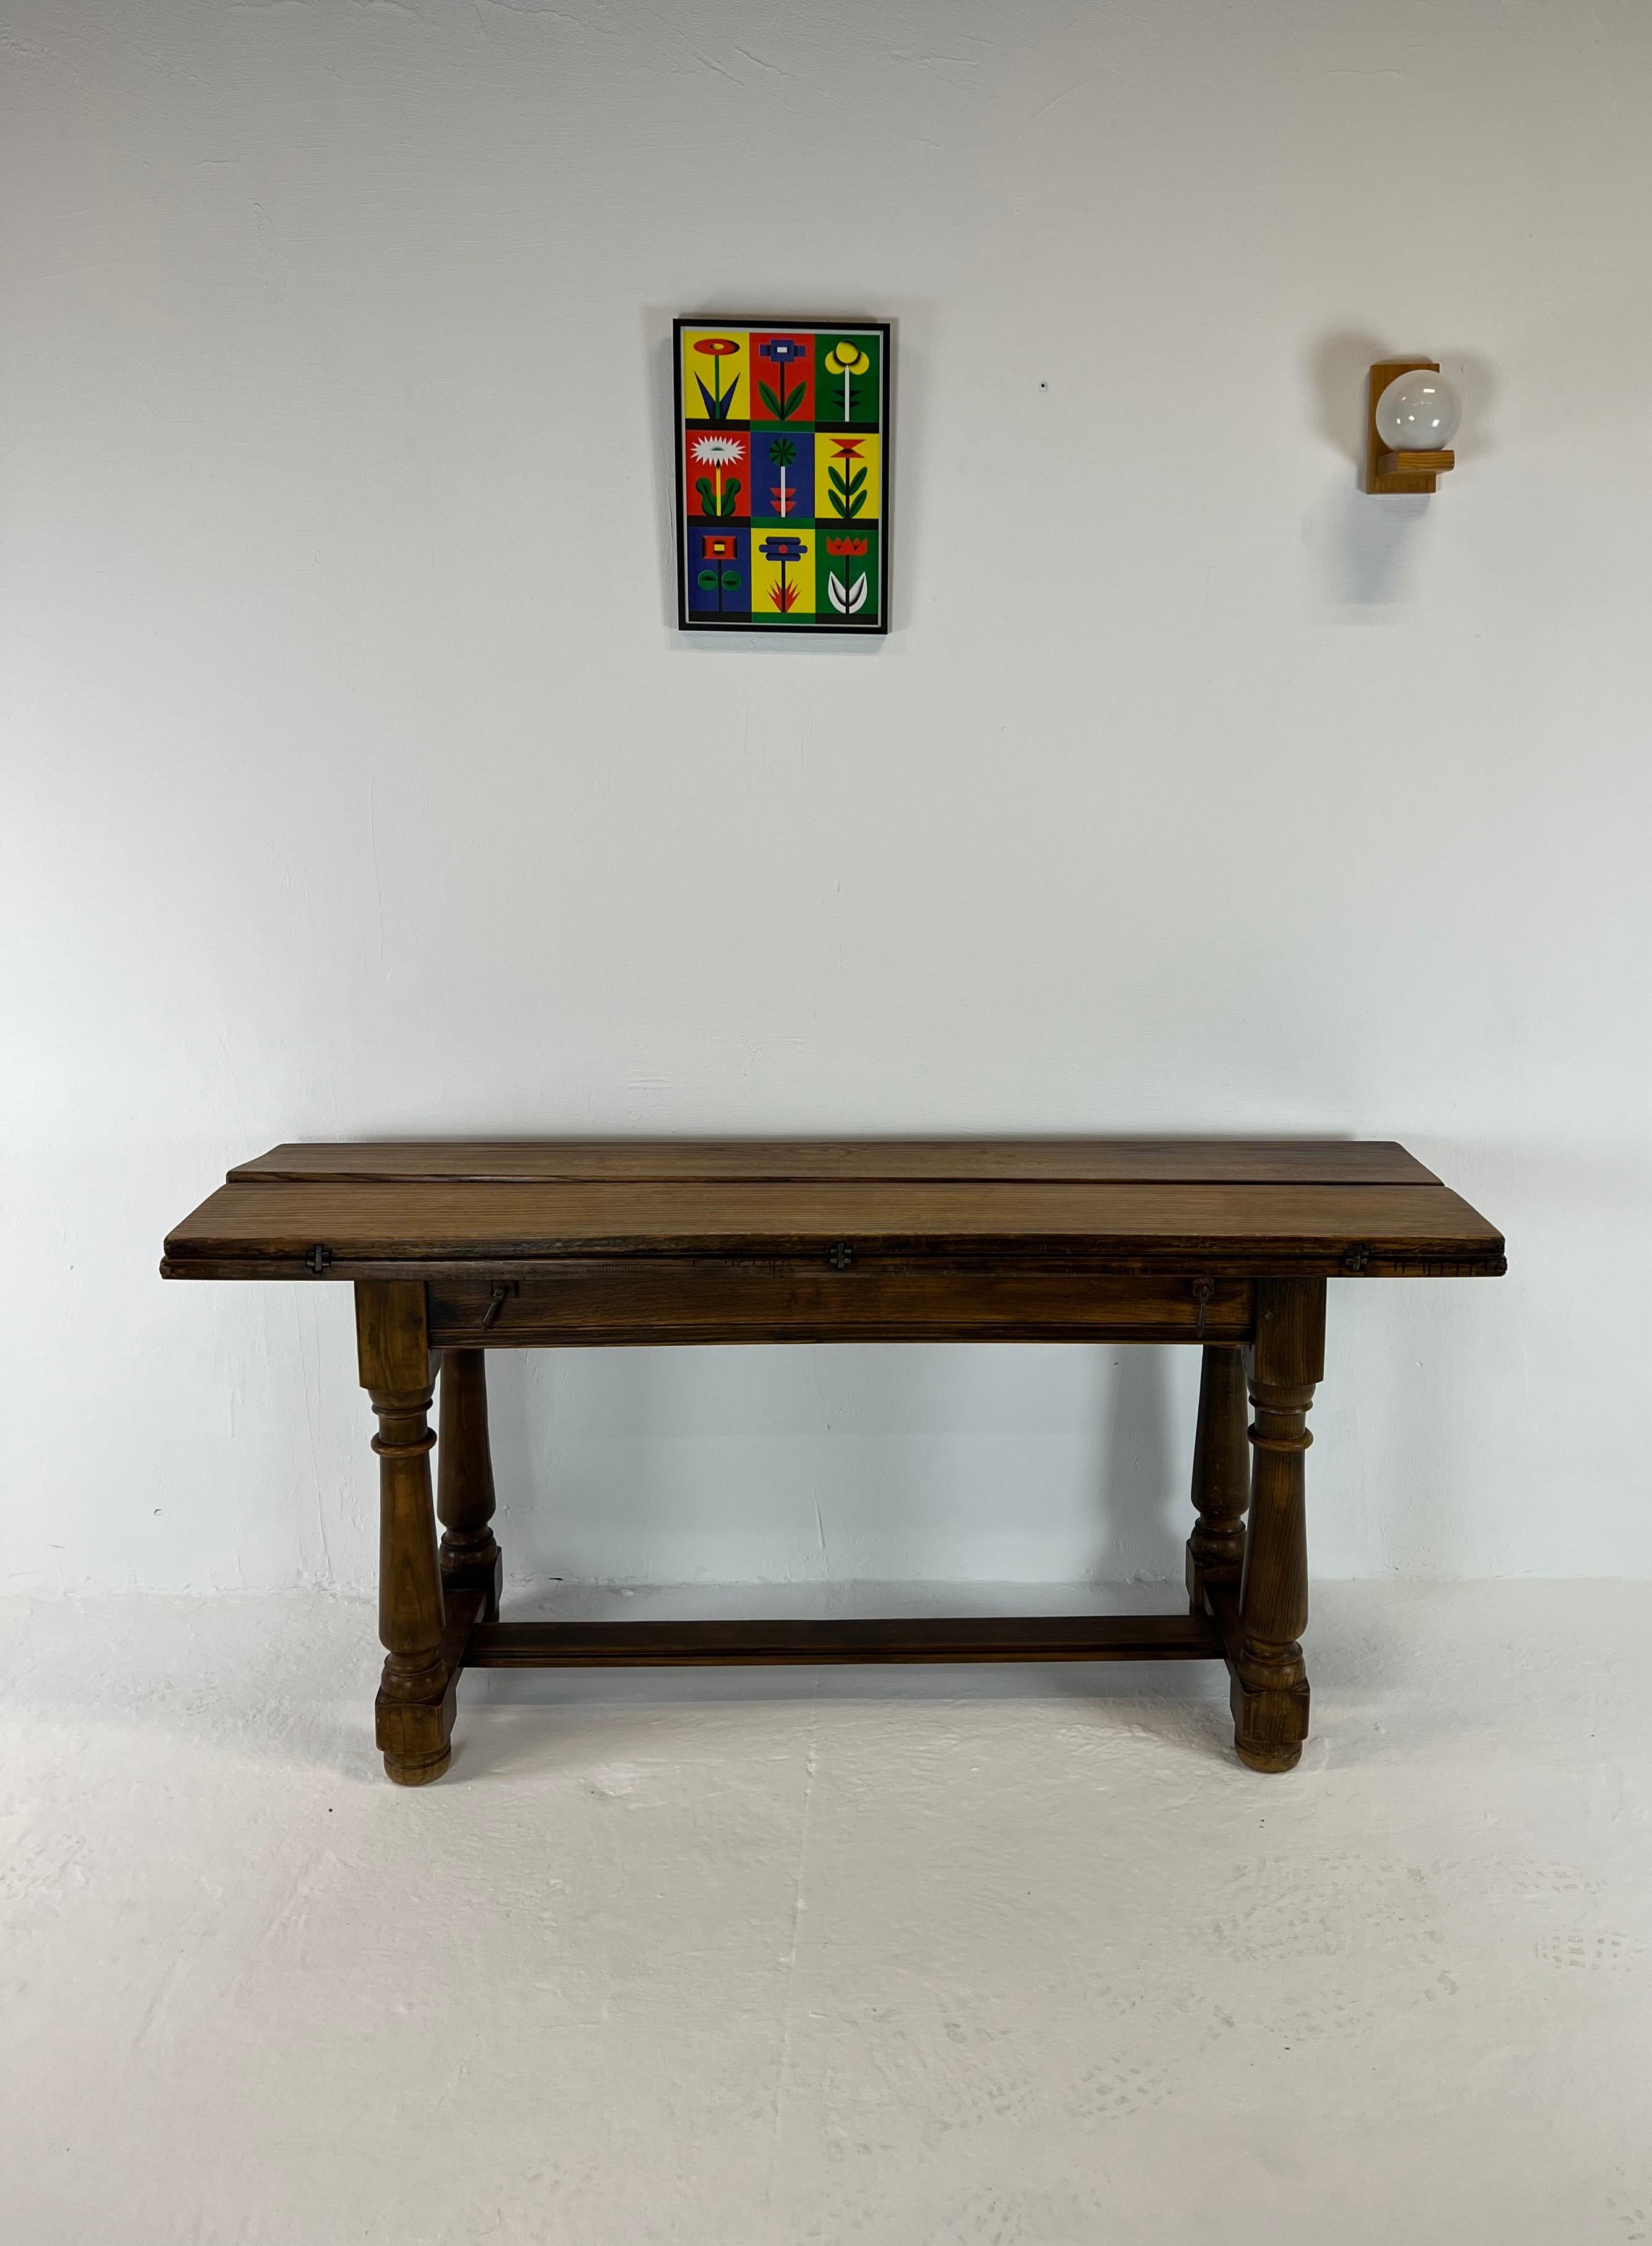 Very pretty dining table - console in oak with turned legs, from the 1900s. It has two horizontal extensions held by superb wrought iron hinges. The extensions rest on two pull tabs that come out on each side. The zippers are decorated at their ends